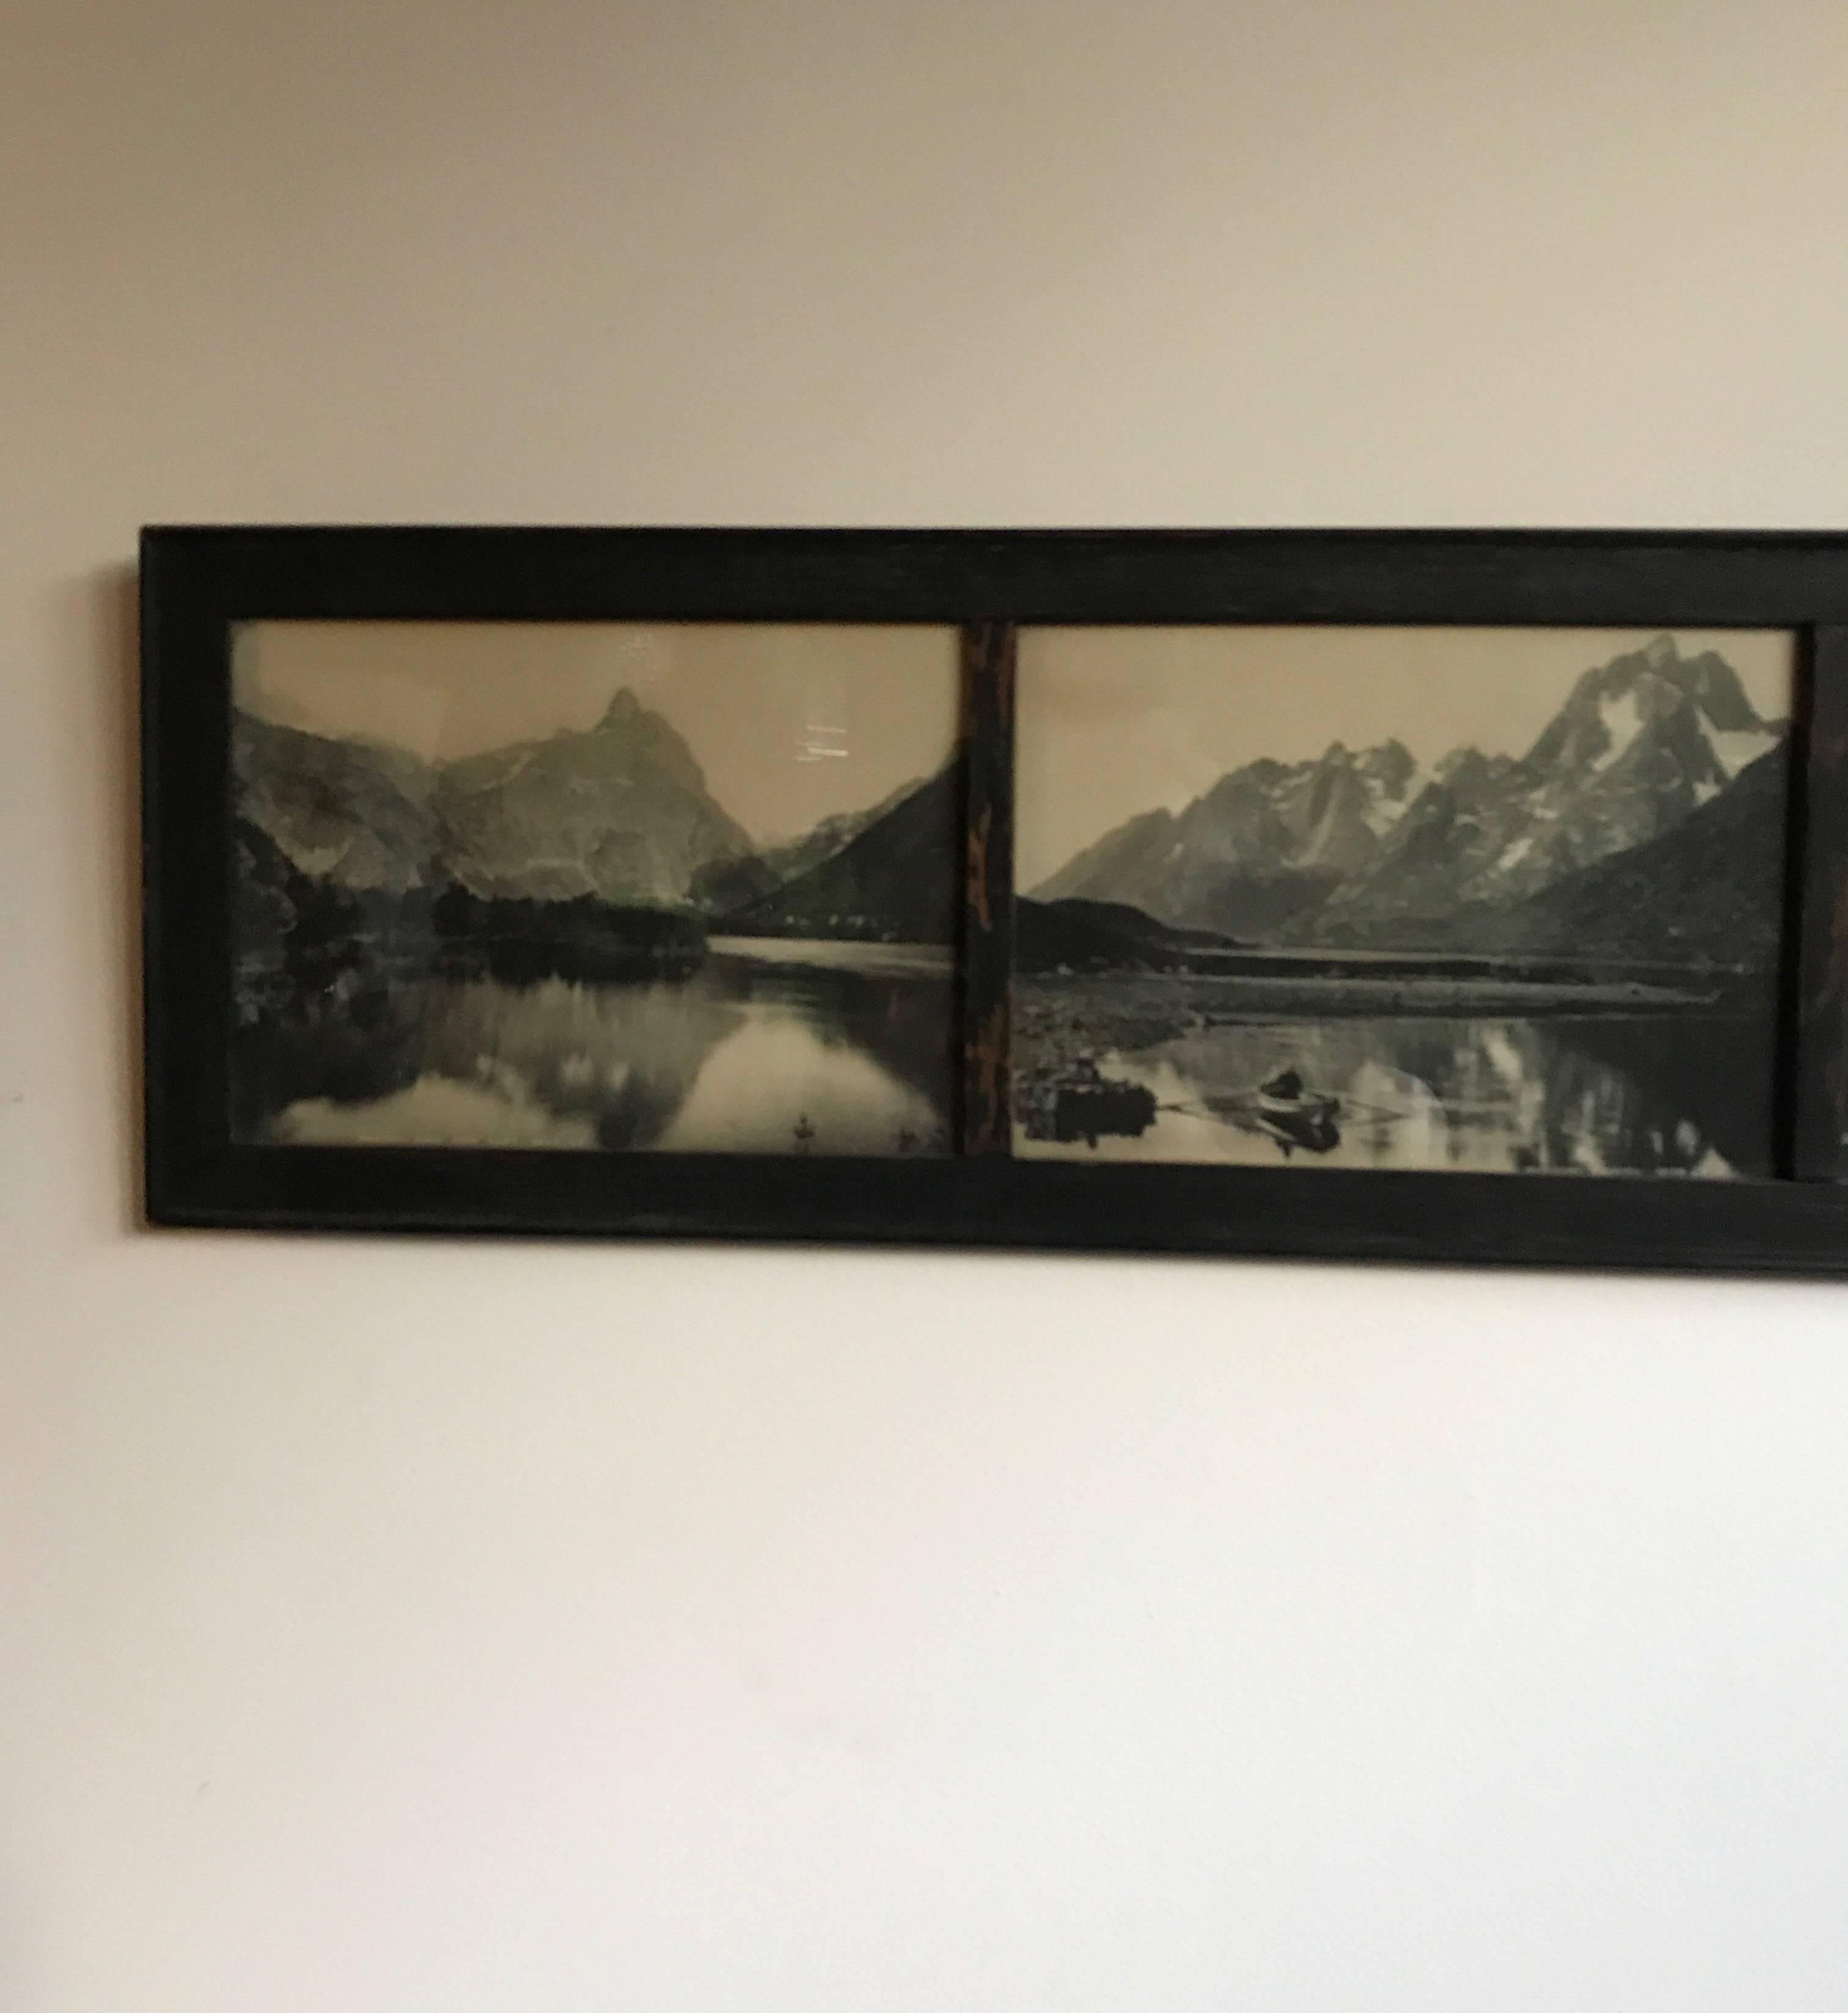 A beautiful 19th century black and white natural scenic photographs of Loen Lake Nordfjord in Norway.
For many the most picturesque region of Norway. The five photographs are framed in what appears to be the original oak frame.
Great decorative